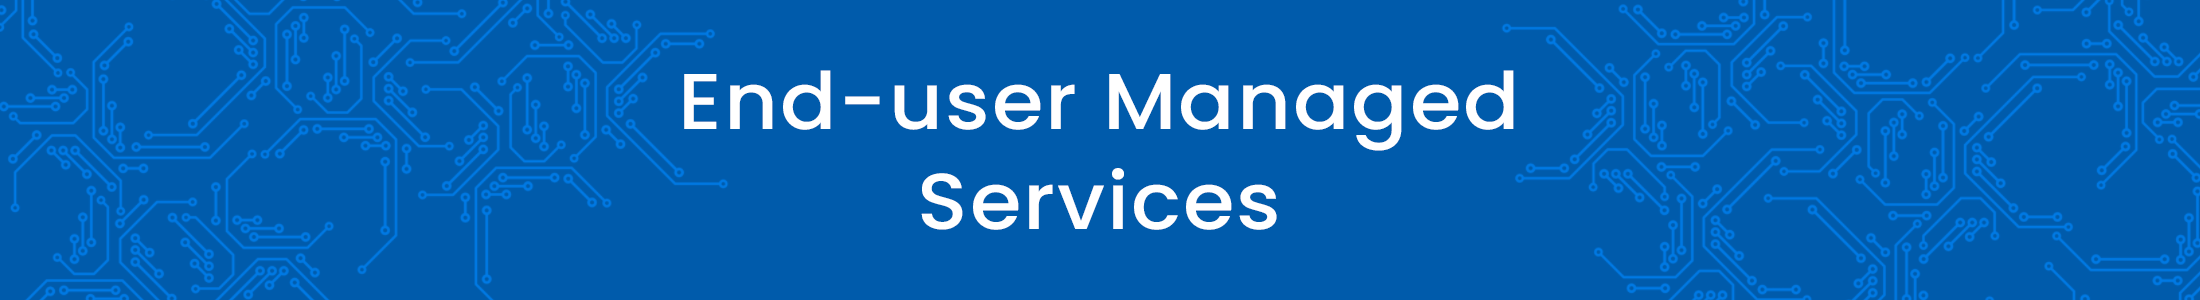 end-user-managed-services